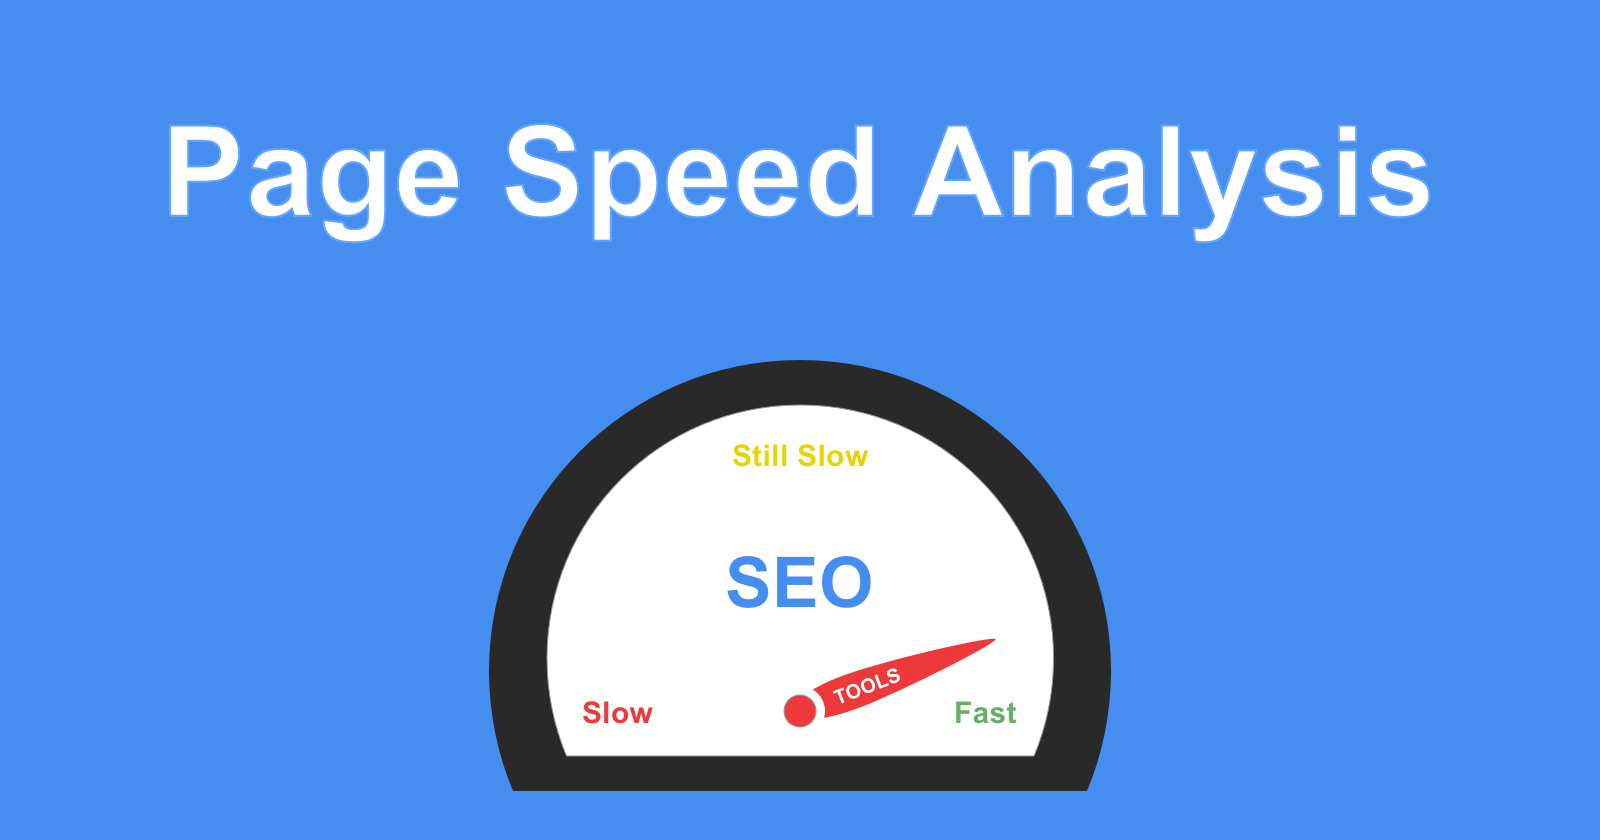 Page speed analysis for SEO